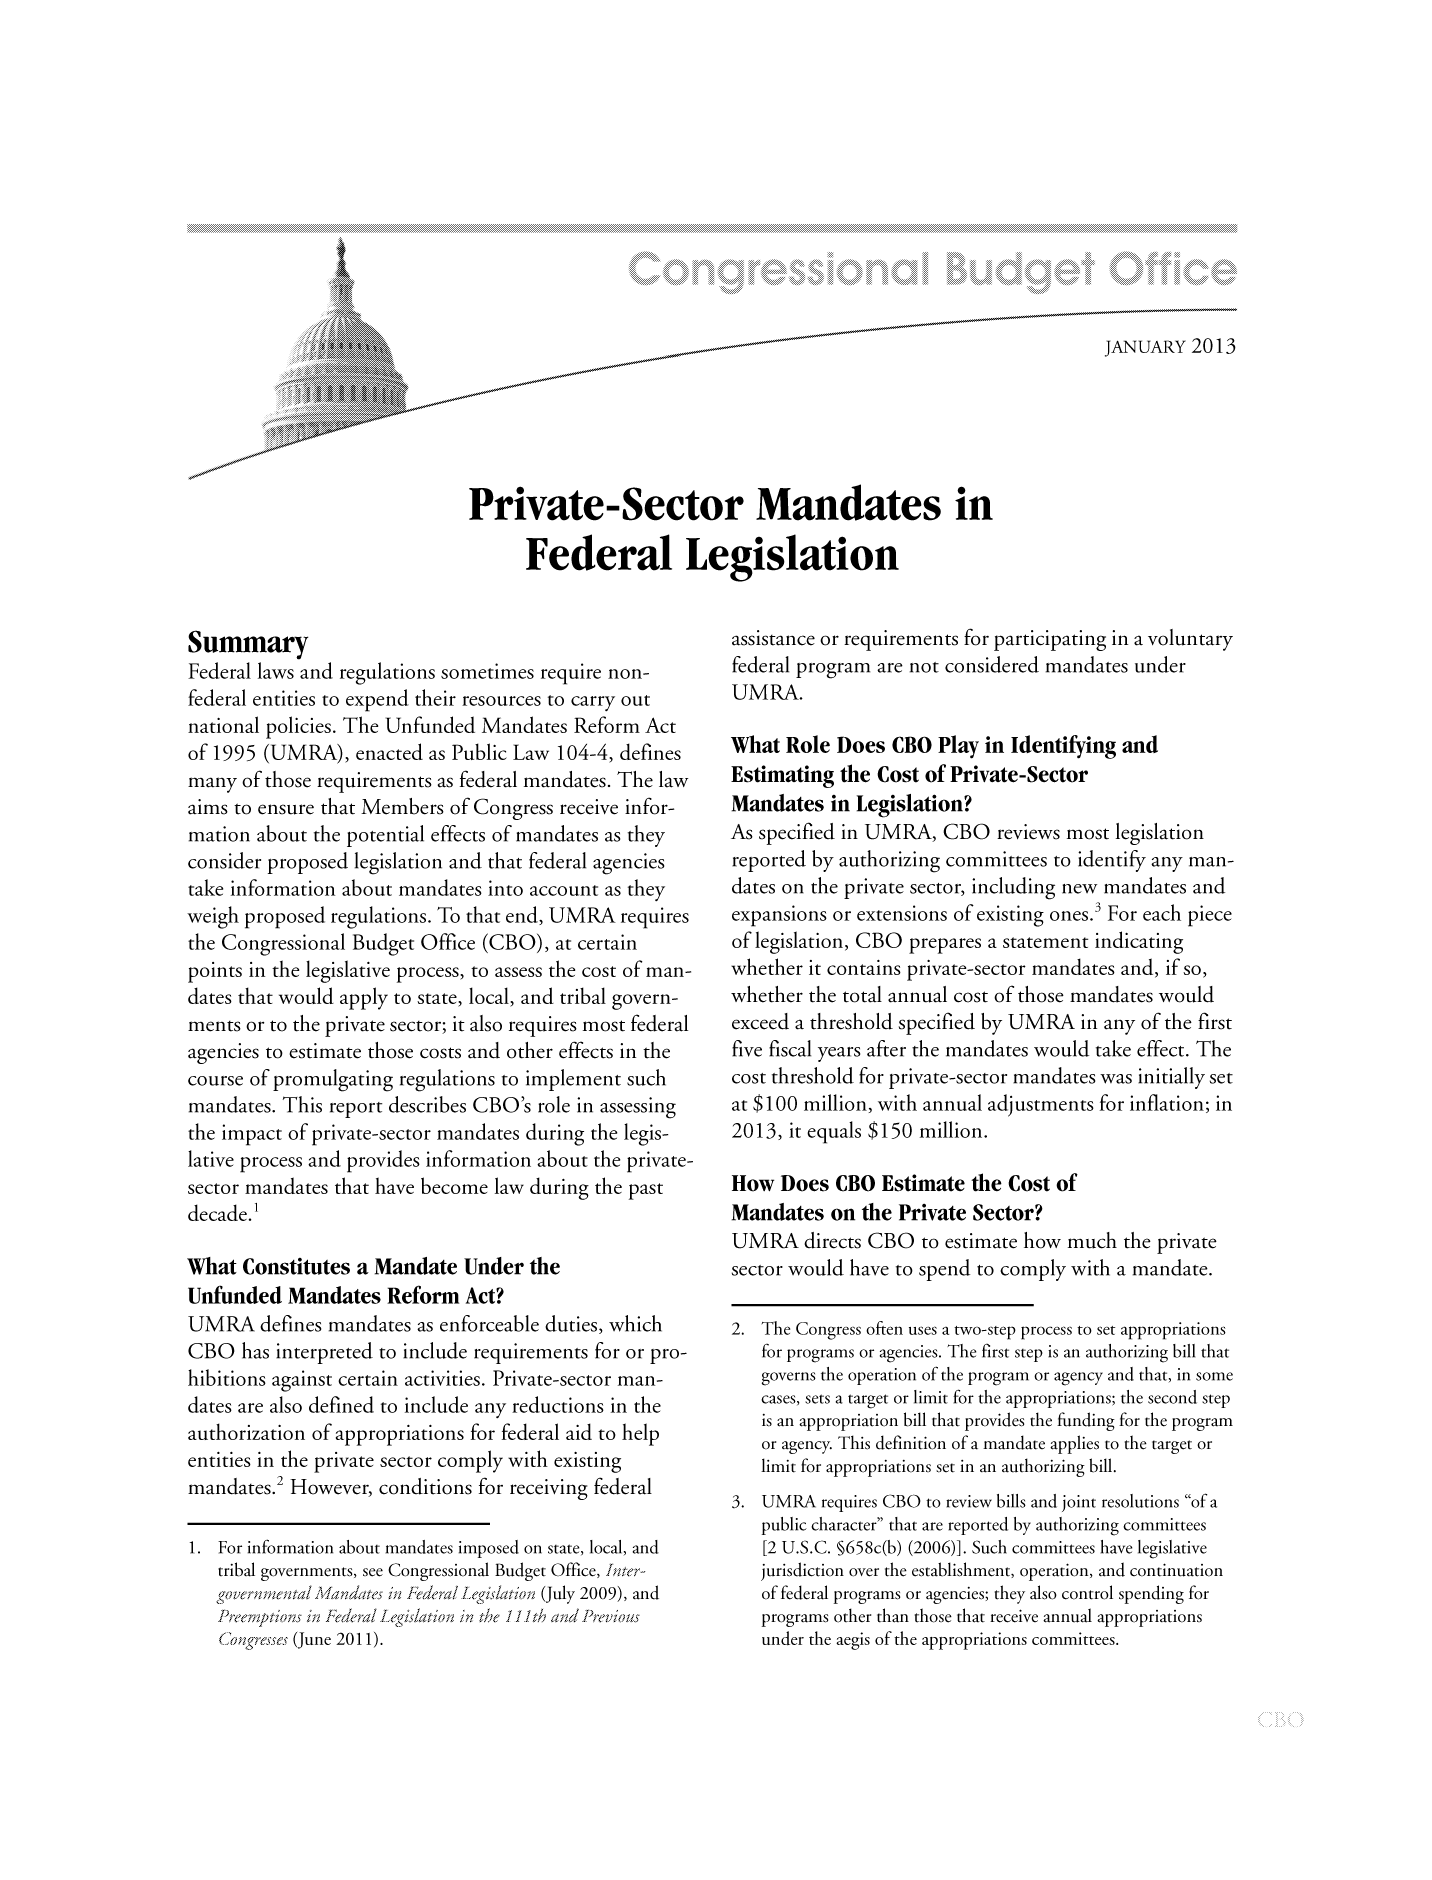 handle is hein.congrec/cbo10979 and id is 1 raw text is: JANUARY 2013
Private-Sector Mandates in
Federal Legislation

Summary
Federal laws and regulations sometimes require non-
federal entities to expend their resources to carry out
national policies. The Unfunded Mandates Reform Act
of 1995 (UMRA), enacted as Public Law 104-4, defines
many of those requirements as federal mandates. The law
aims to ensure that Members of Congress receive infor-
mation about the potential effects of mandates as they
consider proposed legislation and that federal agencies
take information about mandates into account as they
weigh proposed regulations. To that end, UMRA requires
the Congressional Budget Office (CBO), at certain
points in the legislative process, to assess the cost of man-
dates that would apply to state, local, and tribal govern-
ments or to the private sector; it also requires most federal
agencies to estimate those costs and other effects in the
course of promulgating regulations to implement such
mandates. This report describes CBO's role in assessing
the impact of private-sector mandates during the legis-
lative process and provides information about the private-
sector mandates that have become law during the past
decade.1
What Constitutes a Mandate Under the
Unfunded Mandates Reform Act?
UMRA defines mandates as enforceable duties, which
CBO has interpreted to include requirements for or pro-
hibitions against certain activities. Private-sector man-
dates are also defined to include any reductions in the
authorization of appropriations for federal aid to help
entities in the private sector comply with existing
mandates.2 However, conditions for receiving federal
1. For information about mandates imposed on state, local, and
tribal governments, see Congressional Budget Office, Iter
g ove? nental M andates in Fedeai fe  iationi (July 2009), and
Preefiptions in Federal fLieaon in the 111th and Previous
C'ongres.es (June 2011).

assistance or requirements for participating in a voluntary
federal program are not considered mandates under
UMRA.
What Role Does CBO Play in Identifying and
Estimating the Cost of Private-Sector
Mandates in Legislation?
As specified in UMRA, CBO reviews most legislation
reported by authorizing committees to identify any man-
dates on the private sector, including new mandates and
expansions or extensions of existing ones.3 For each piece
of legislation, CBO prepares a statement indicating
whether it contains private-sector mandates and, if so,
whether the total annual cost of those mandates would
exceed a threshold specified by UMRA in any of the first
five fiscal years after the mandates would take effect. The
cost threshold for private-sector mandates was initially set
at $100 million, with annual adjustments for inflation; in
2013, it equals $150 million.
How Does CBO Estimate the Cost of
Mandates on the Private Sector?
UMRA directs CBO to estimate how much the private
sector would have to spend to comply with a mandate.
2. The Congress often uses a two-step process to set appropriations
for programs or agencies. The first step is an authorizing bill that
governs the operation of the program or agency and that, in some
cases, sets a target or limit for the appropriations; the second step
is an appropriation bill that provides the funding for the program
or agency. This definition of a mandate applies to the target or
limit for appropriations set in an authorizing bill.
3. UMRA requires CBO to review bills and joint resolutions of a
public character that are reported by authorizing committees
[2 U.S.C. §658c(b) (2006)]. Such committees have legislative
jurisdiction over the establishment, operation, and continuation
of federal programs or agencies; they also control spending for
programs other than those that receive annual appropriations
under the aegis of the appropriations committees.


